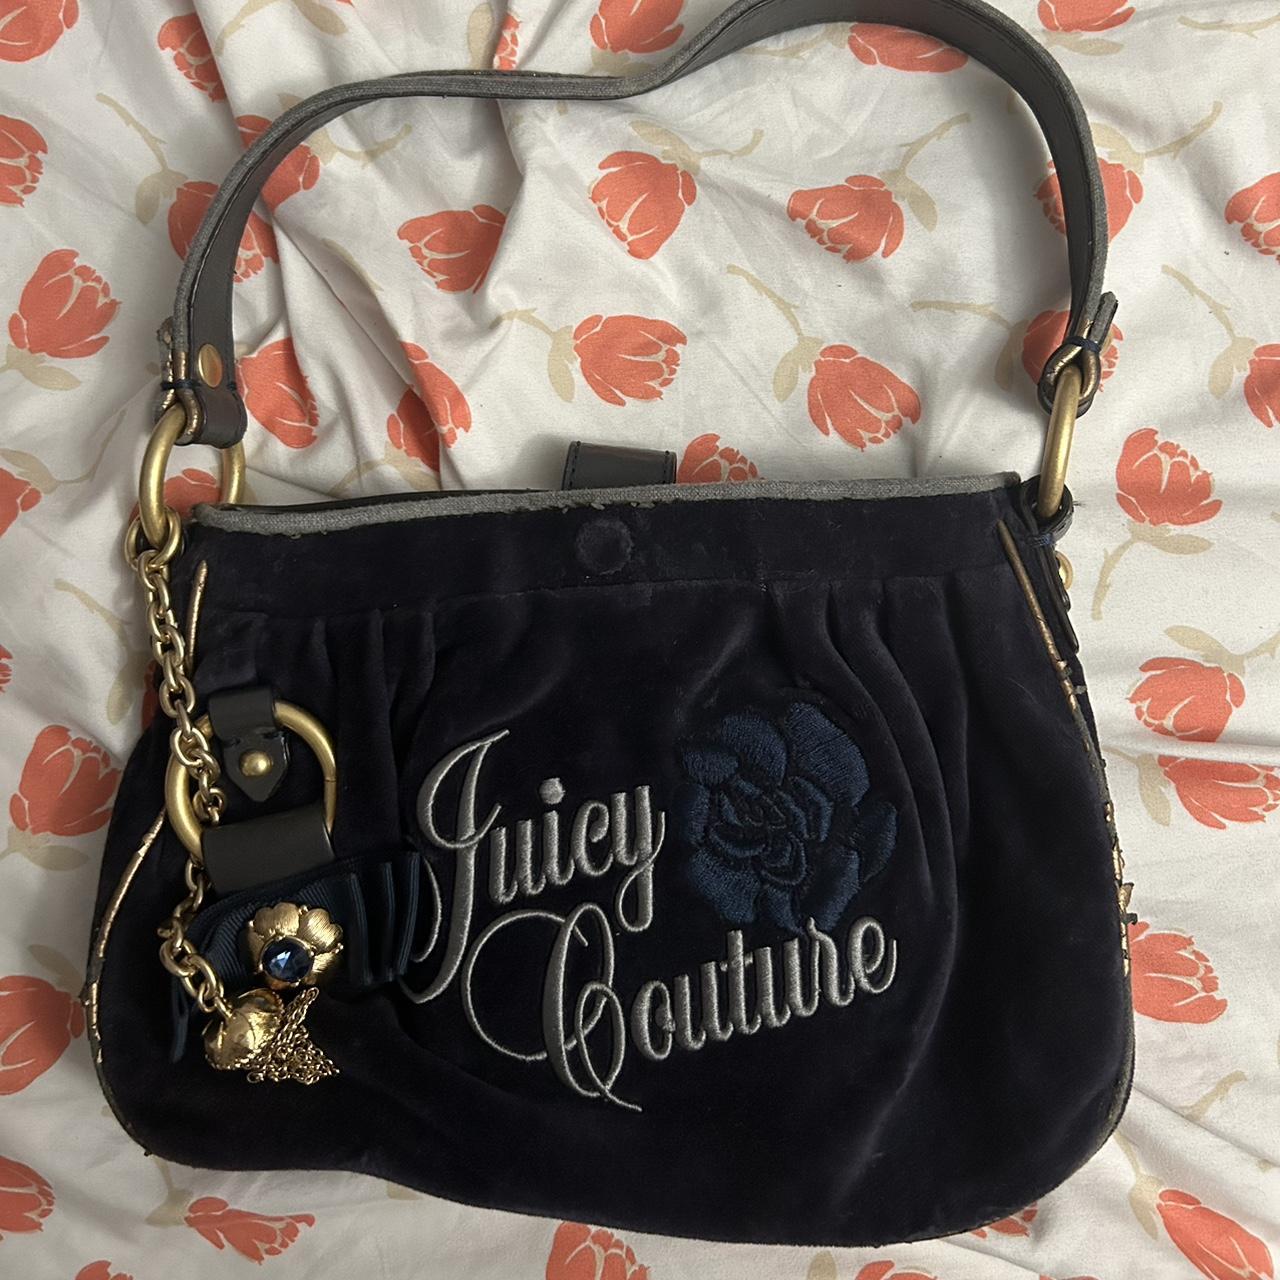 these are my vintage bags from Juicy Couture, both I bought second hand.  The green bag for €40 and the pink one for €50. I would like to know what  kind these